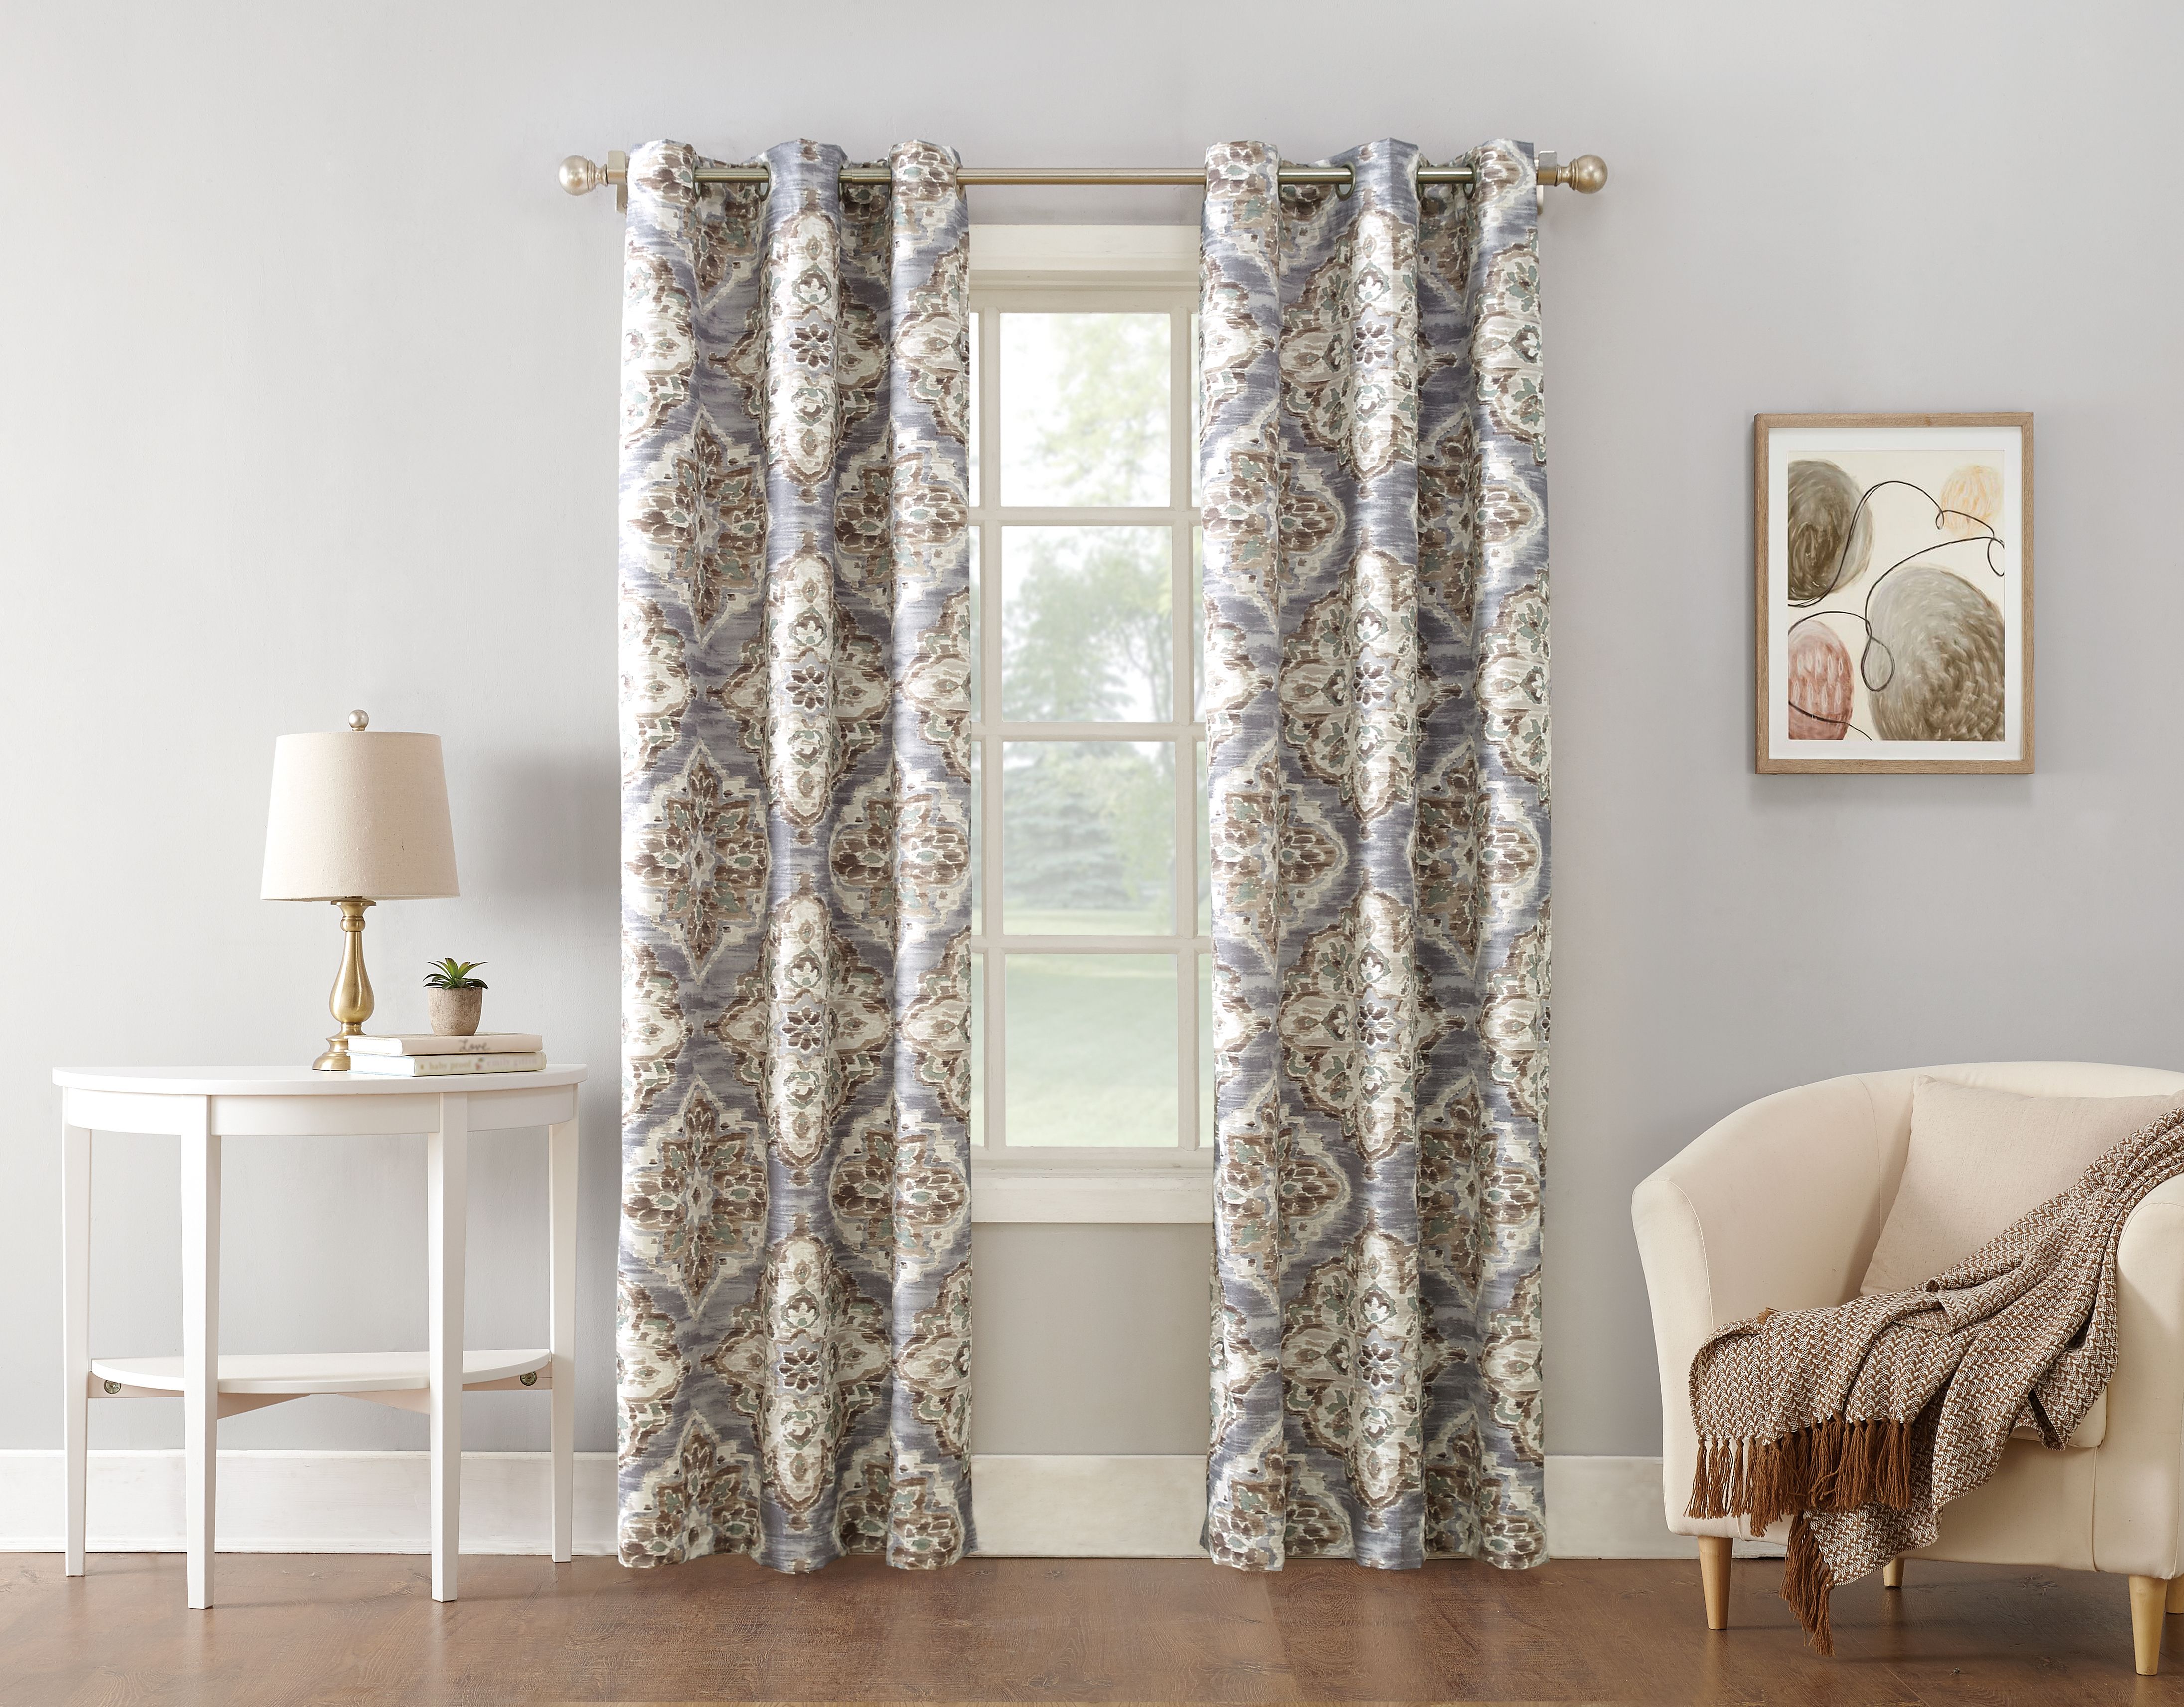 Sun Zero Cooper Textured Thermal Lined Room Darkening Energy Efficient  Grommet Curtain Panel Pertaining To Cooper Textured Thermal Insulated Grommet Curtain Panels (View 18 of 20)